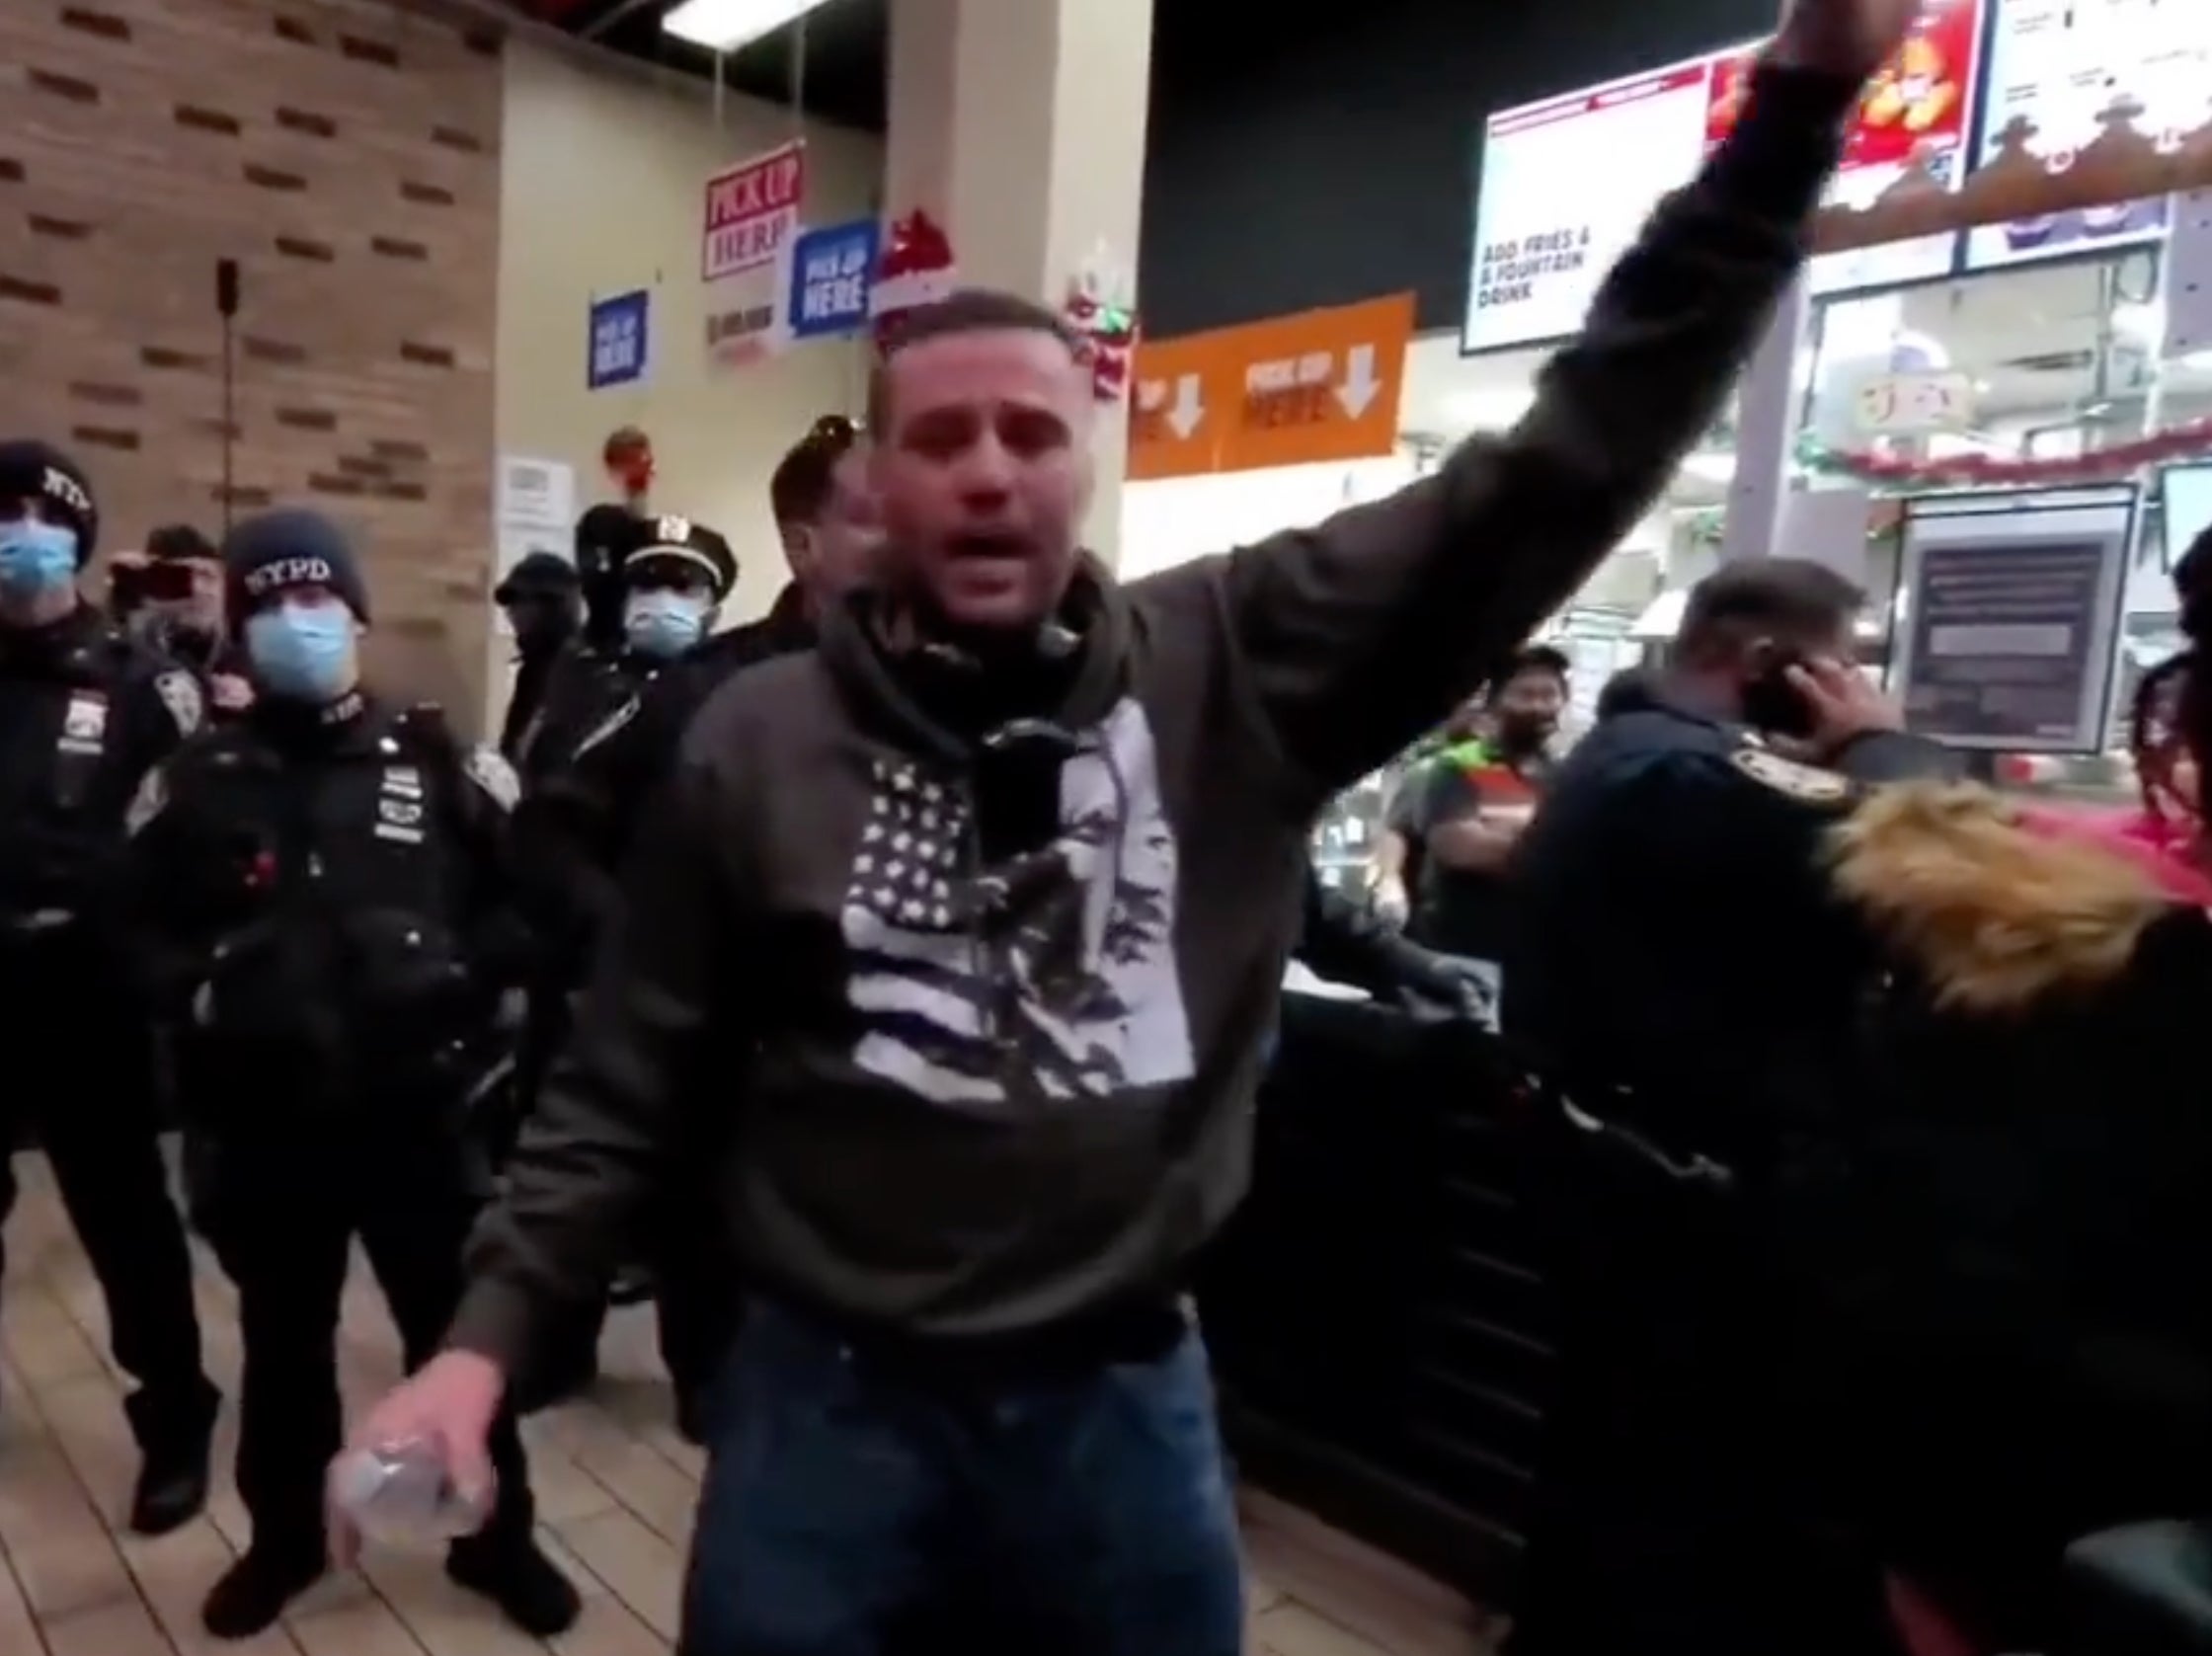 A man speaking during an anti-vaccine protest at a Burger King on Monday